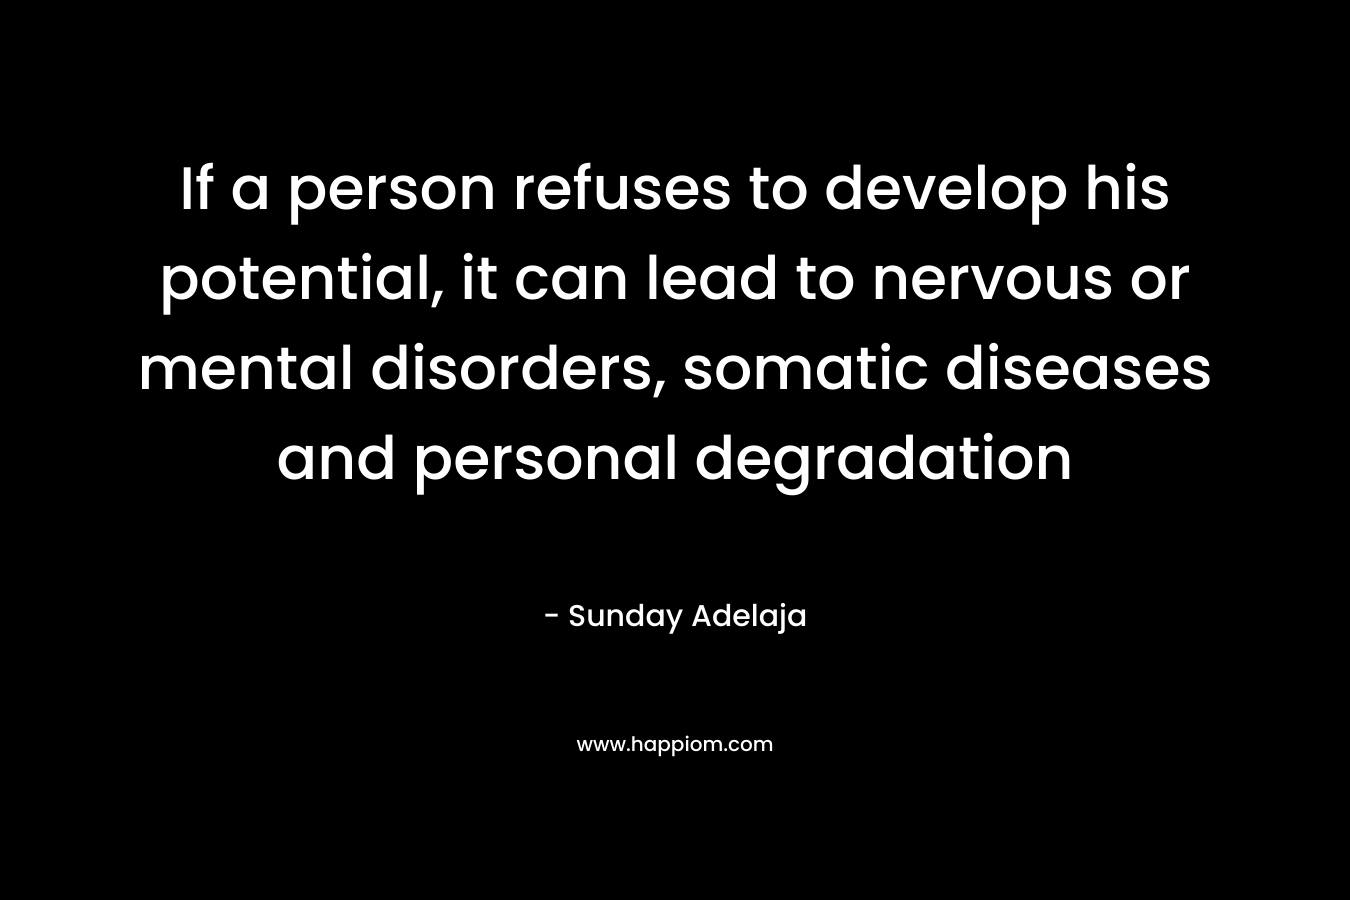 If a person refuses to develop his potential, it can lead to nervous or mental disorders, somatic diseases and personal degradation – Sunday Adelaja